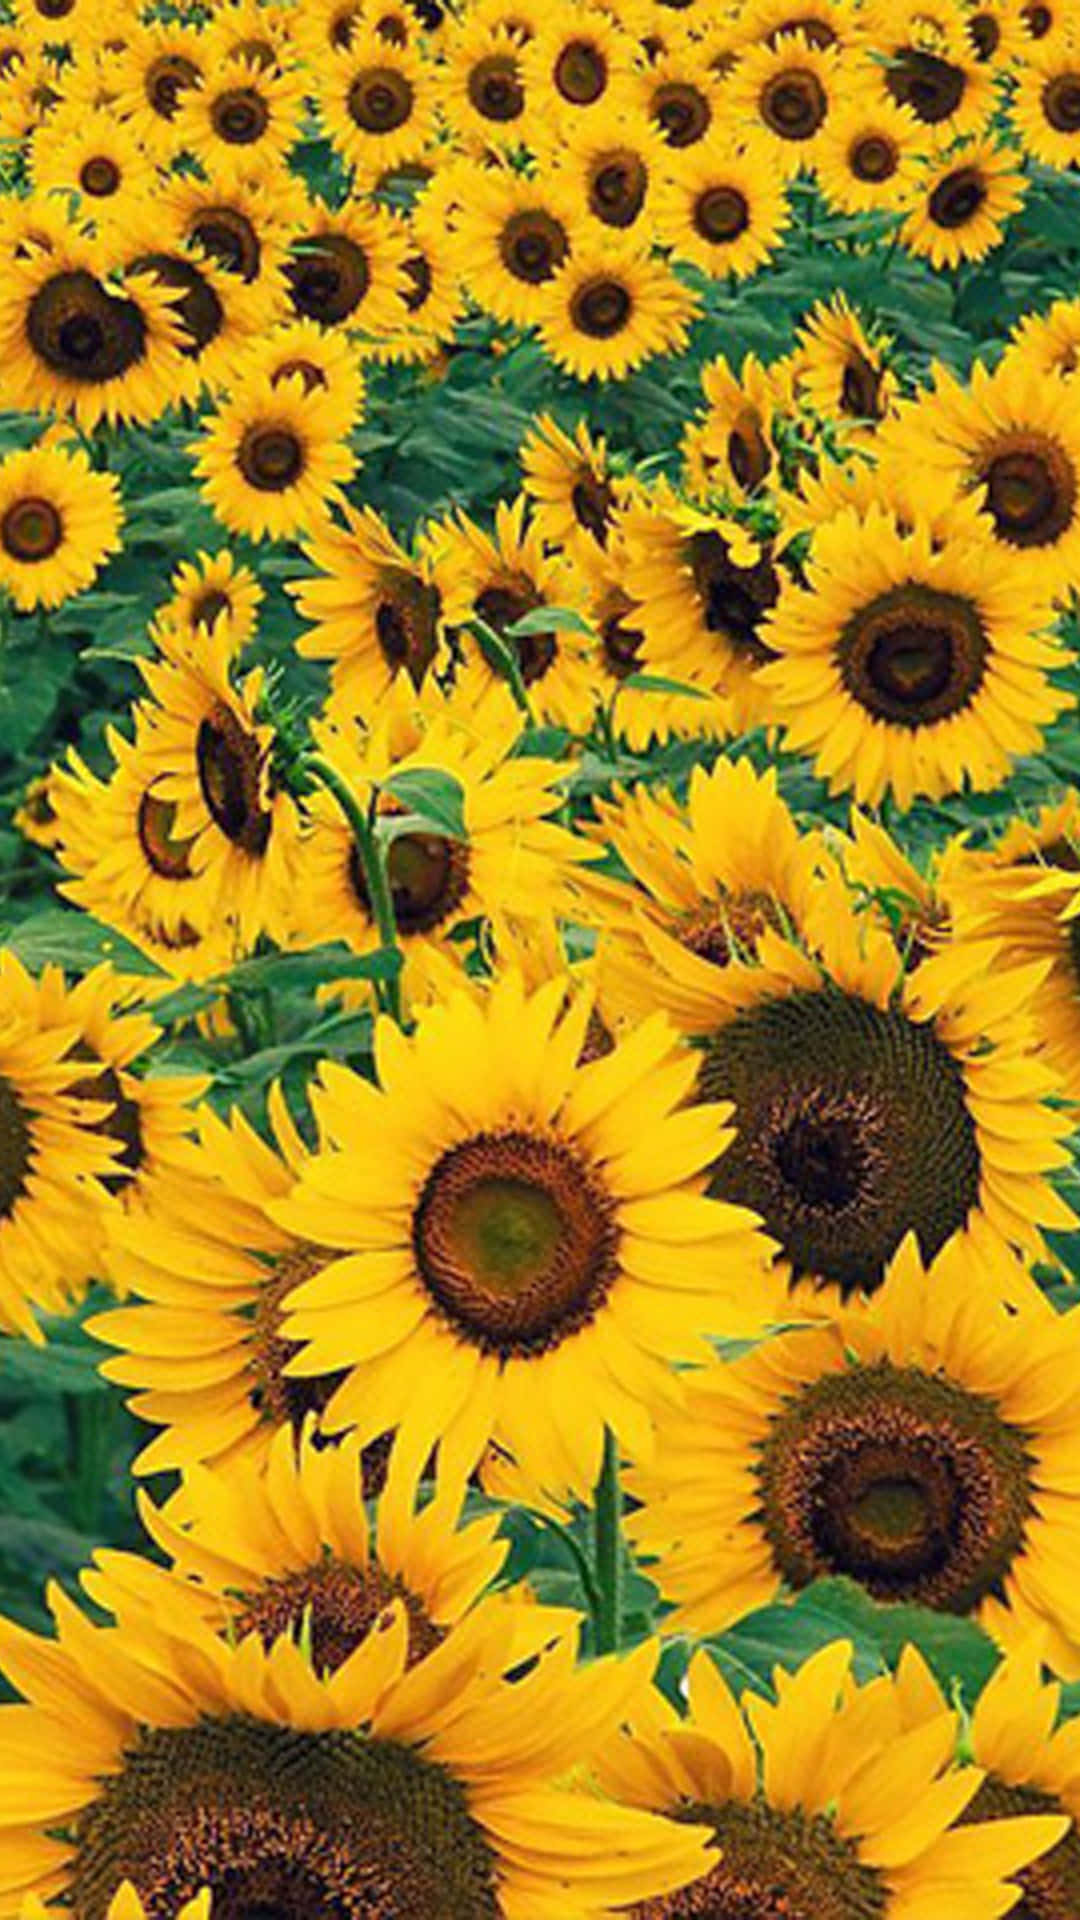 "A bright and vibrant sunflower, in all its golden glory!" Wallpaper